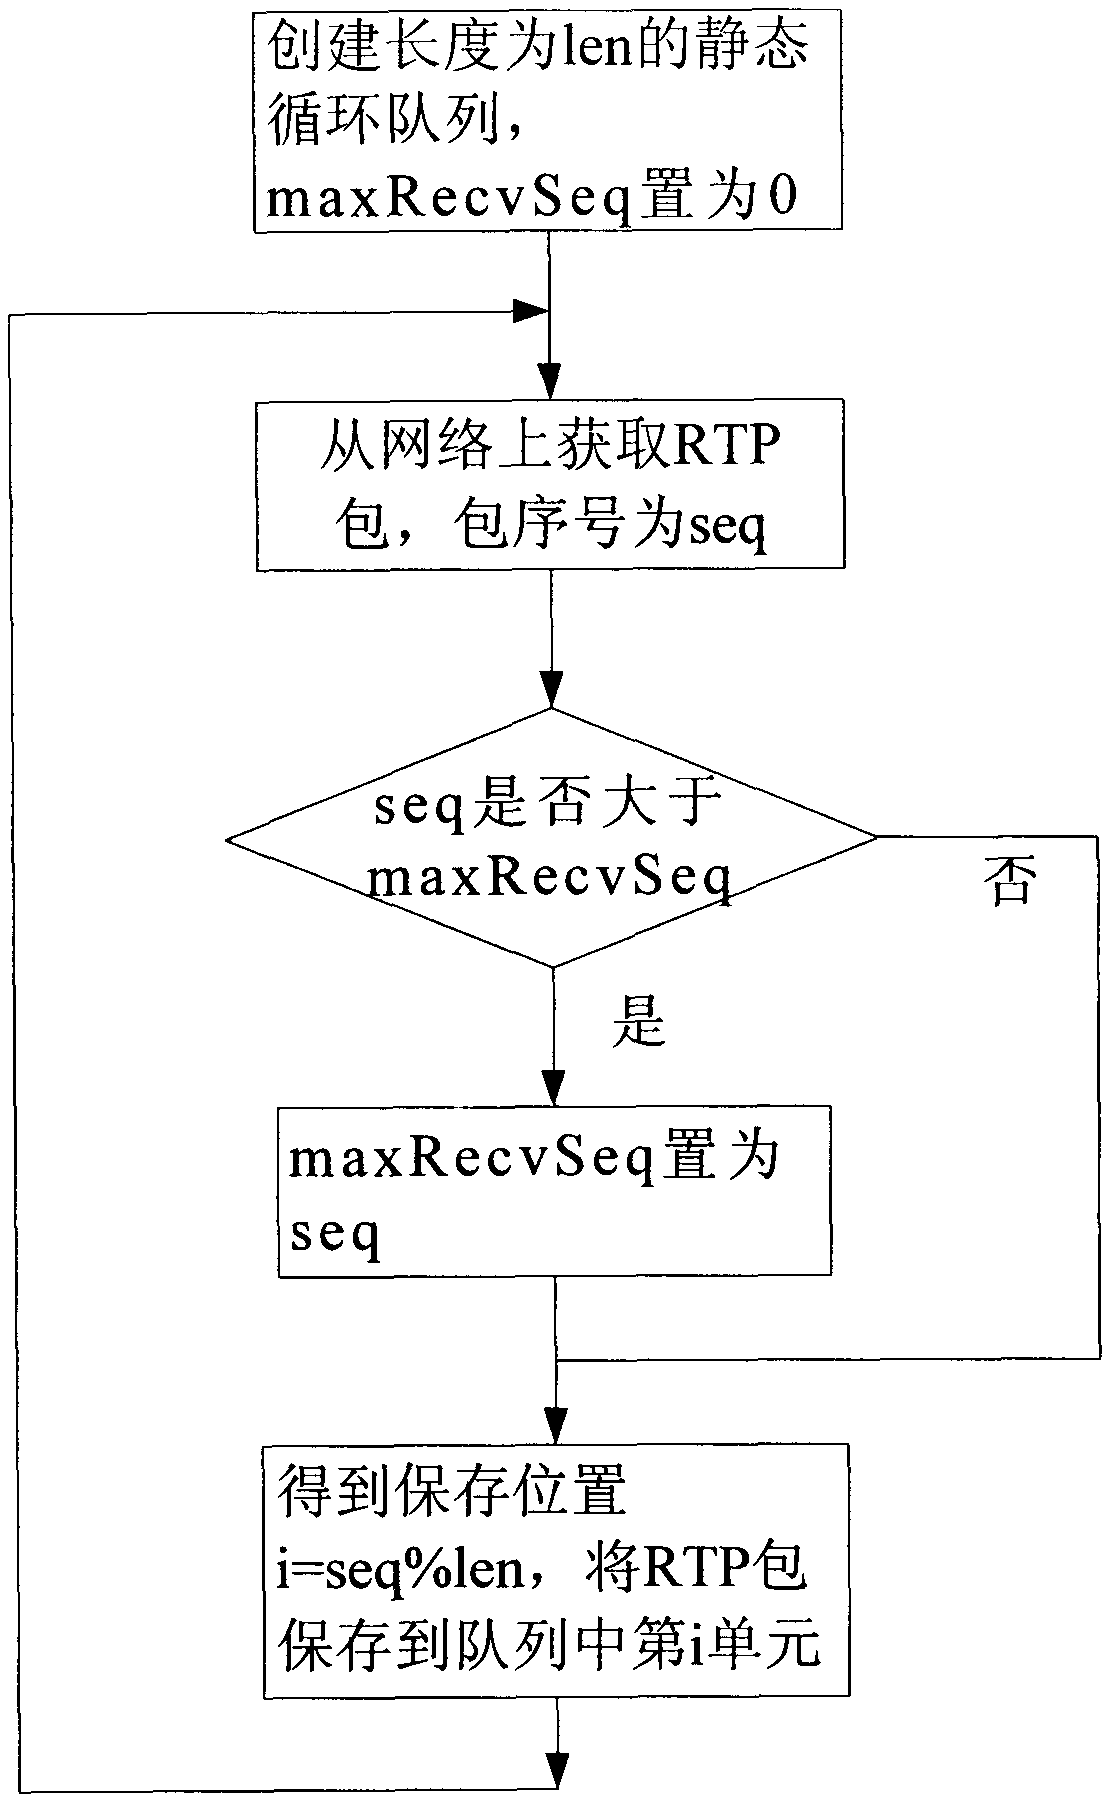 Method for removing jitter, disorder and repeated packets when receiving RTP packets